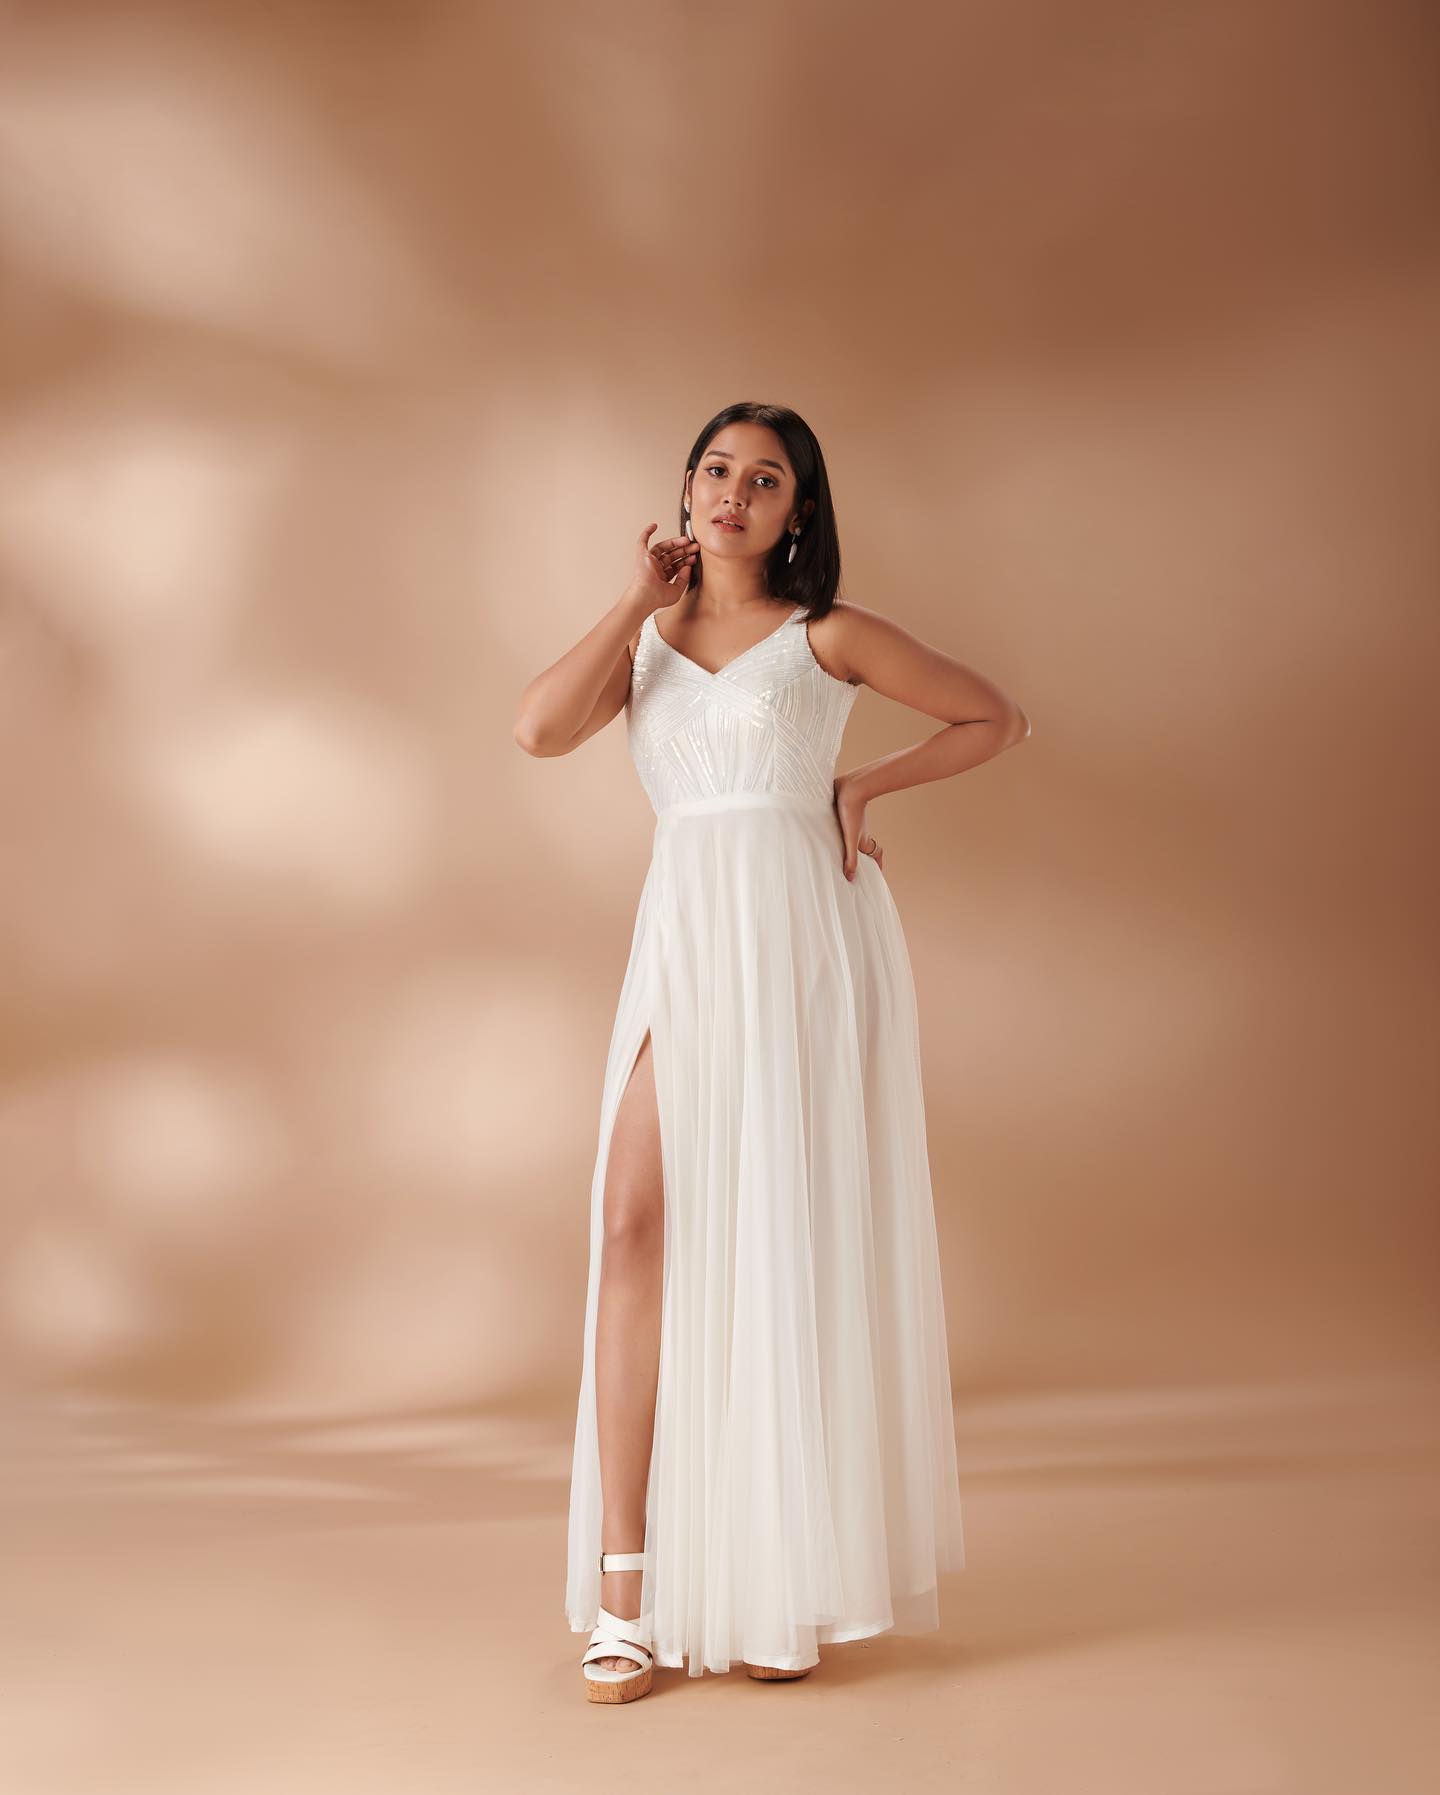 anikha-surendran-in-white-sleeveless-gown-dress-images-001